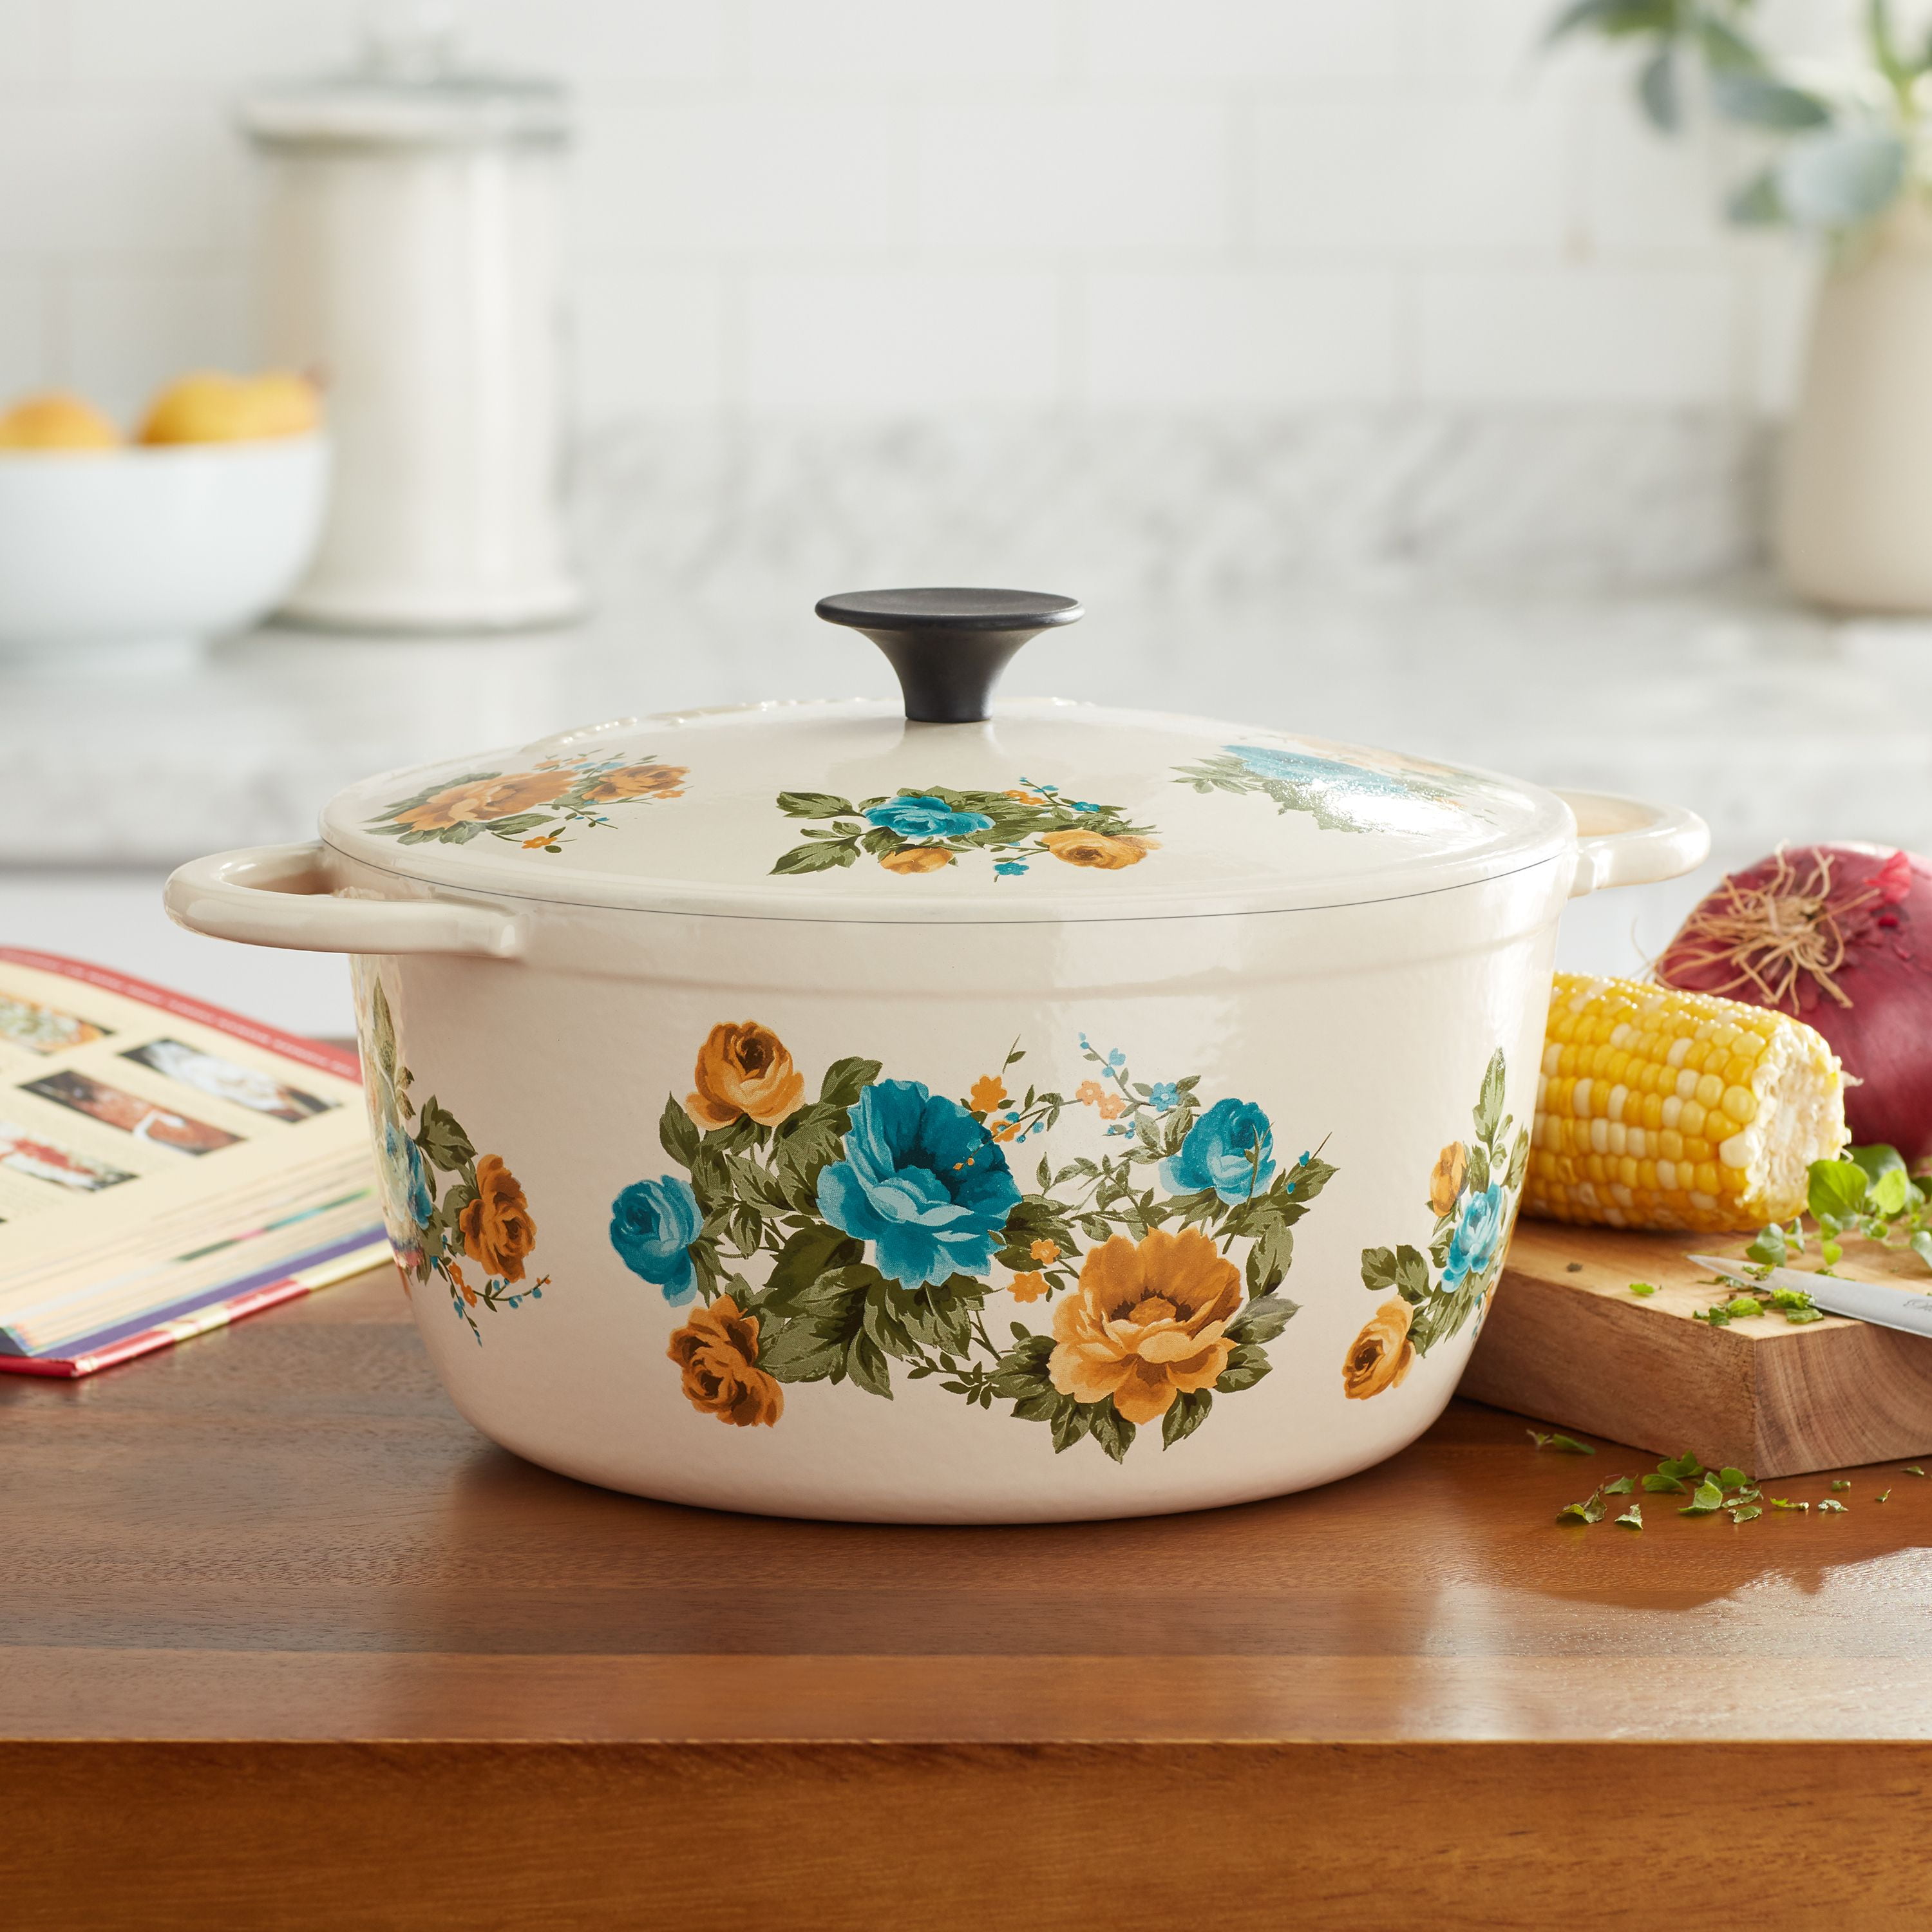 Shop The Pioneer Woman Dutch Oven Sale at Walmart